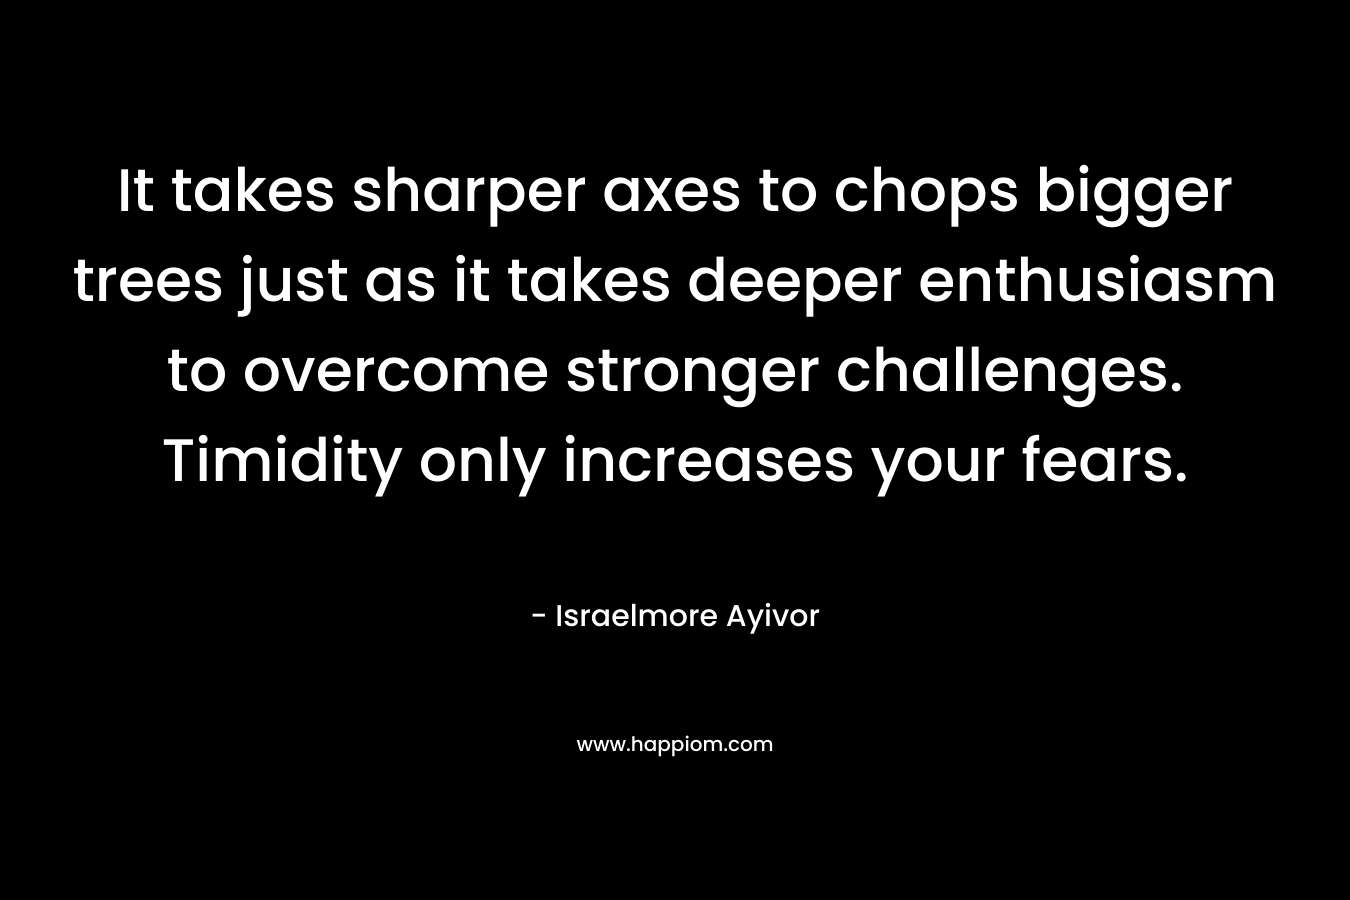 It takes sharper axes to chops bigger trees just as it takes deeper enthusiasm to overcome stronger challenges. Timidity only increases your fears.